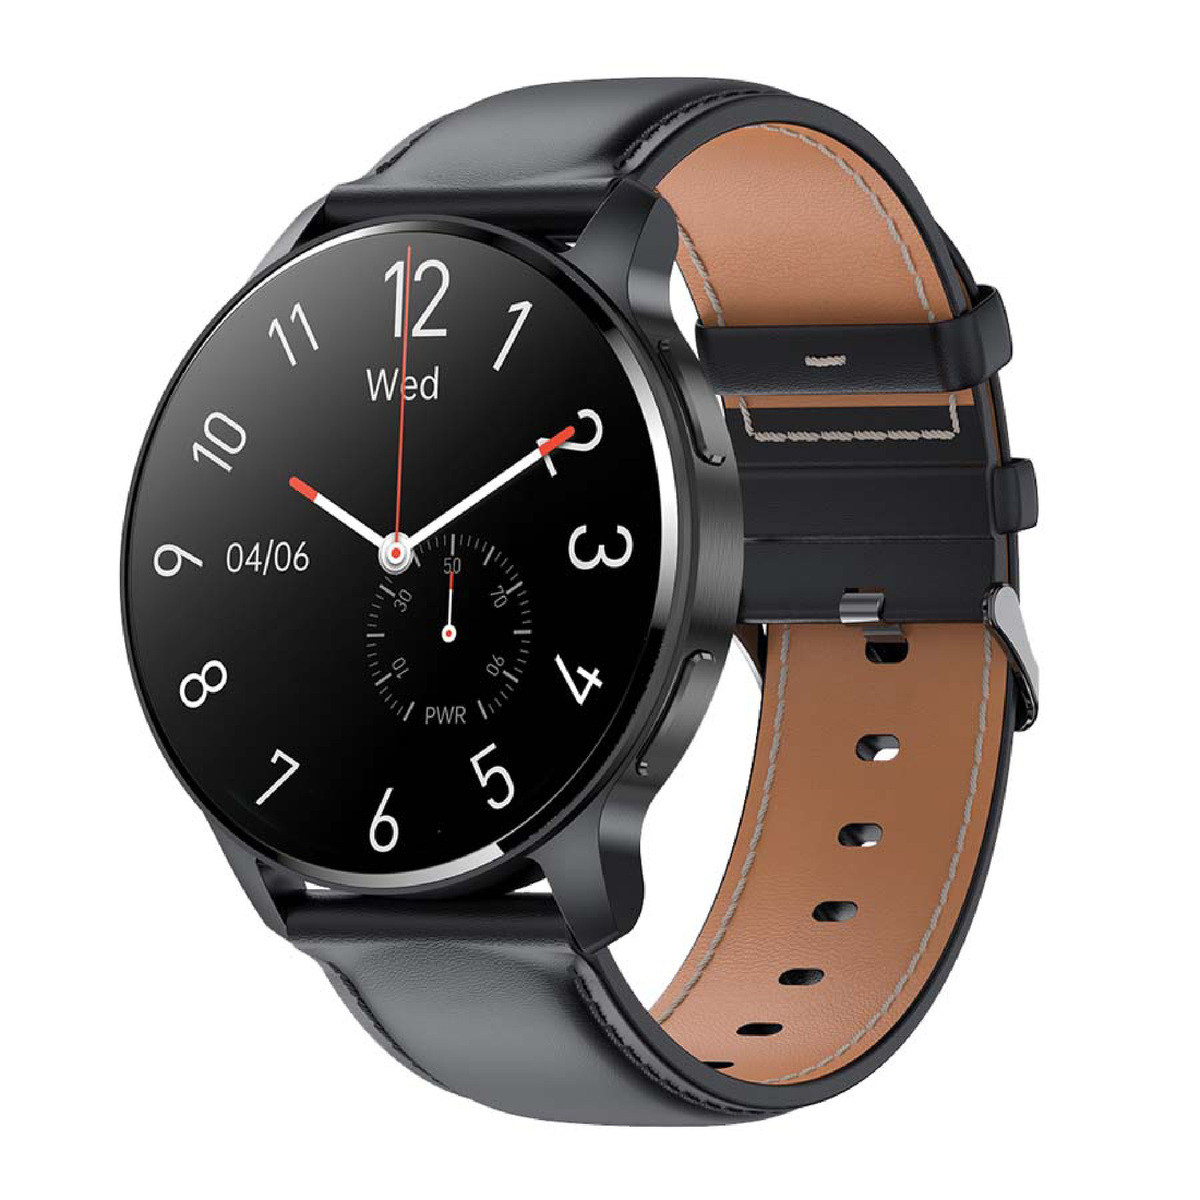 X.Cell Elite 2 Smart Watch- Black Leather Strap